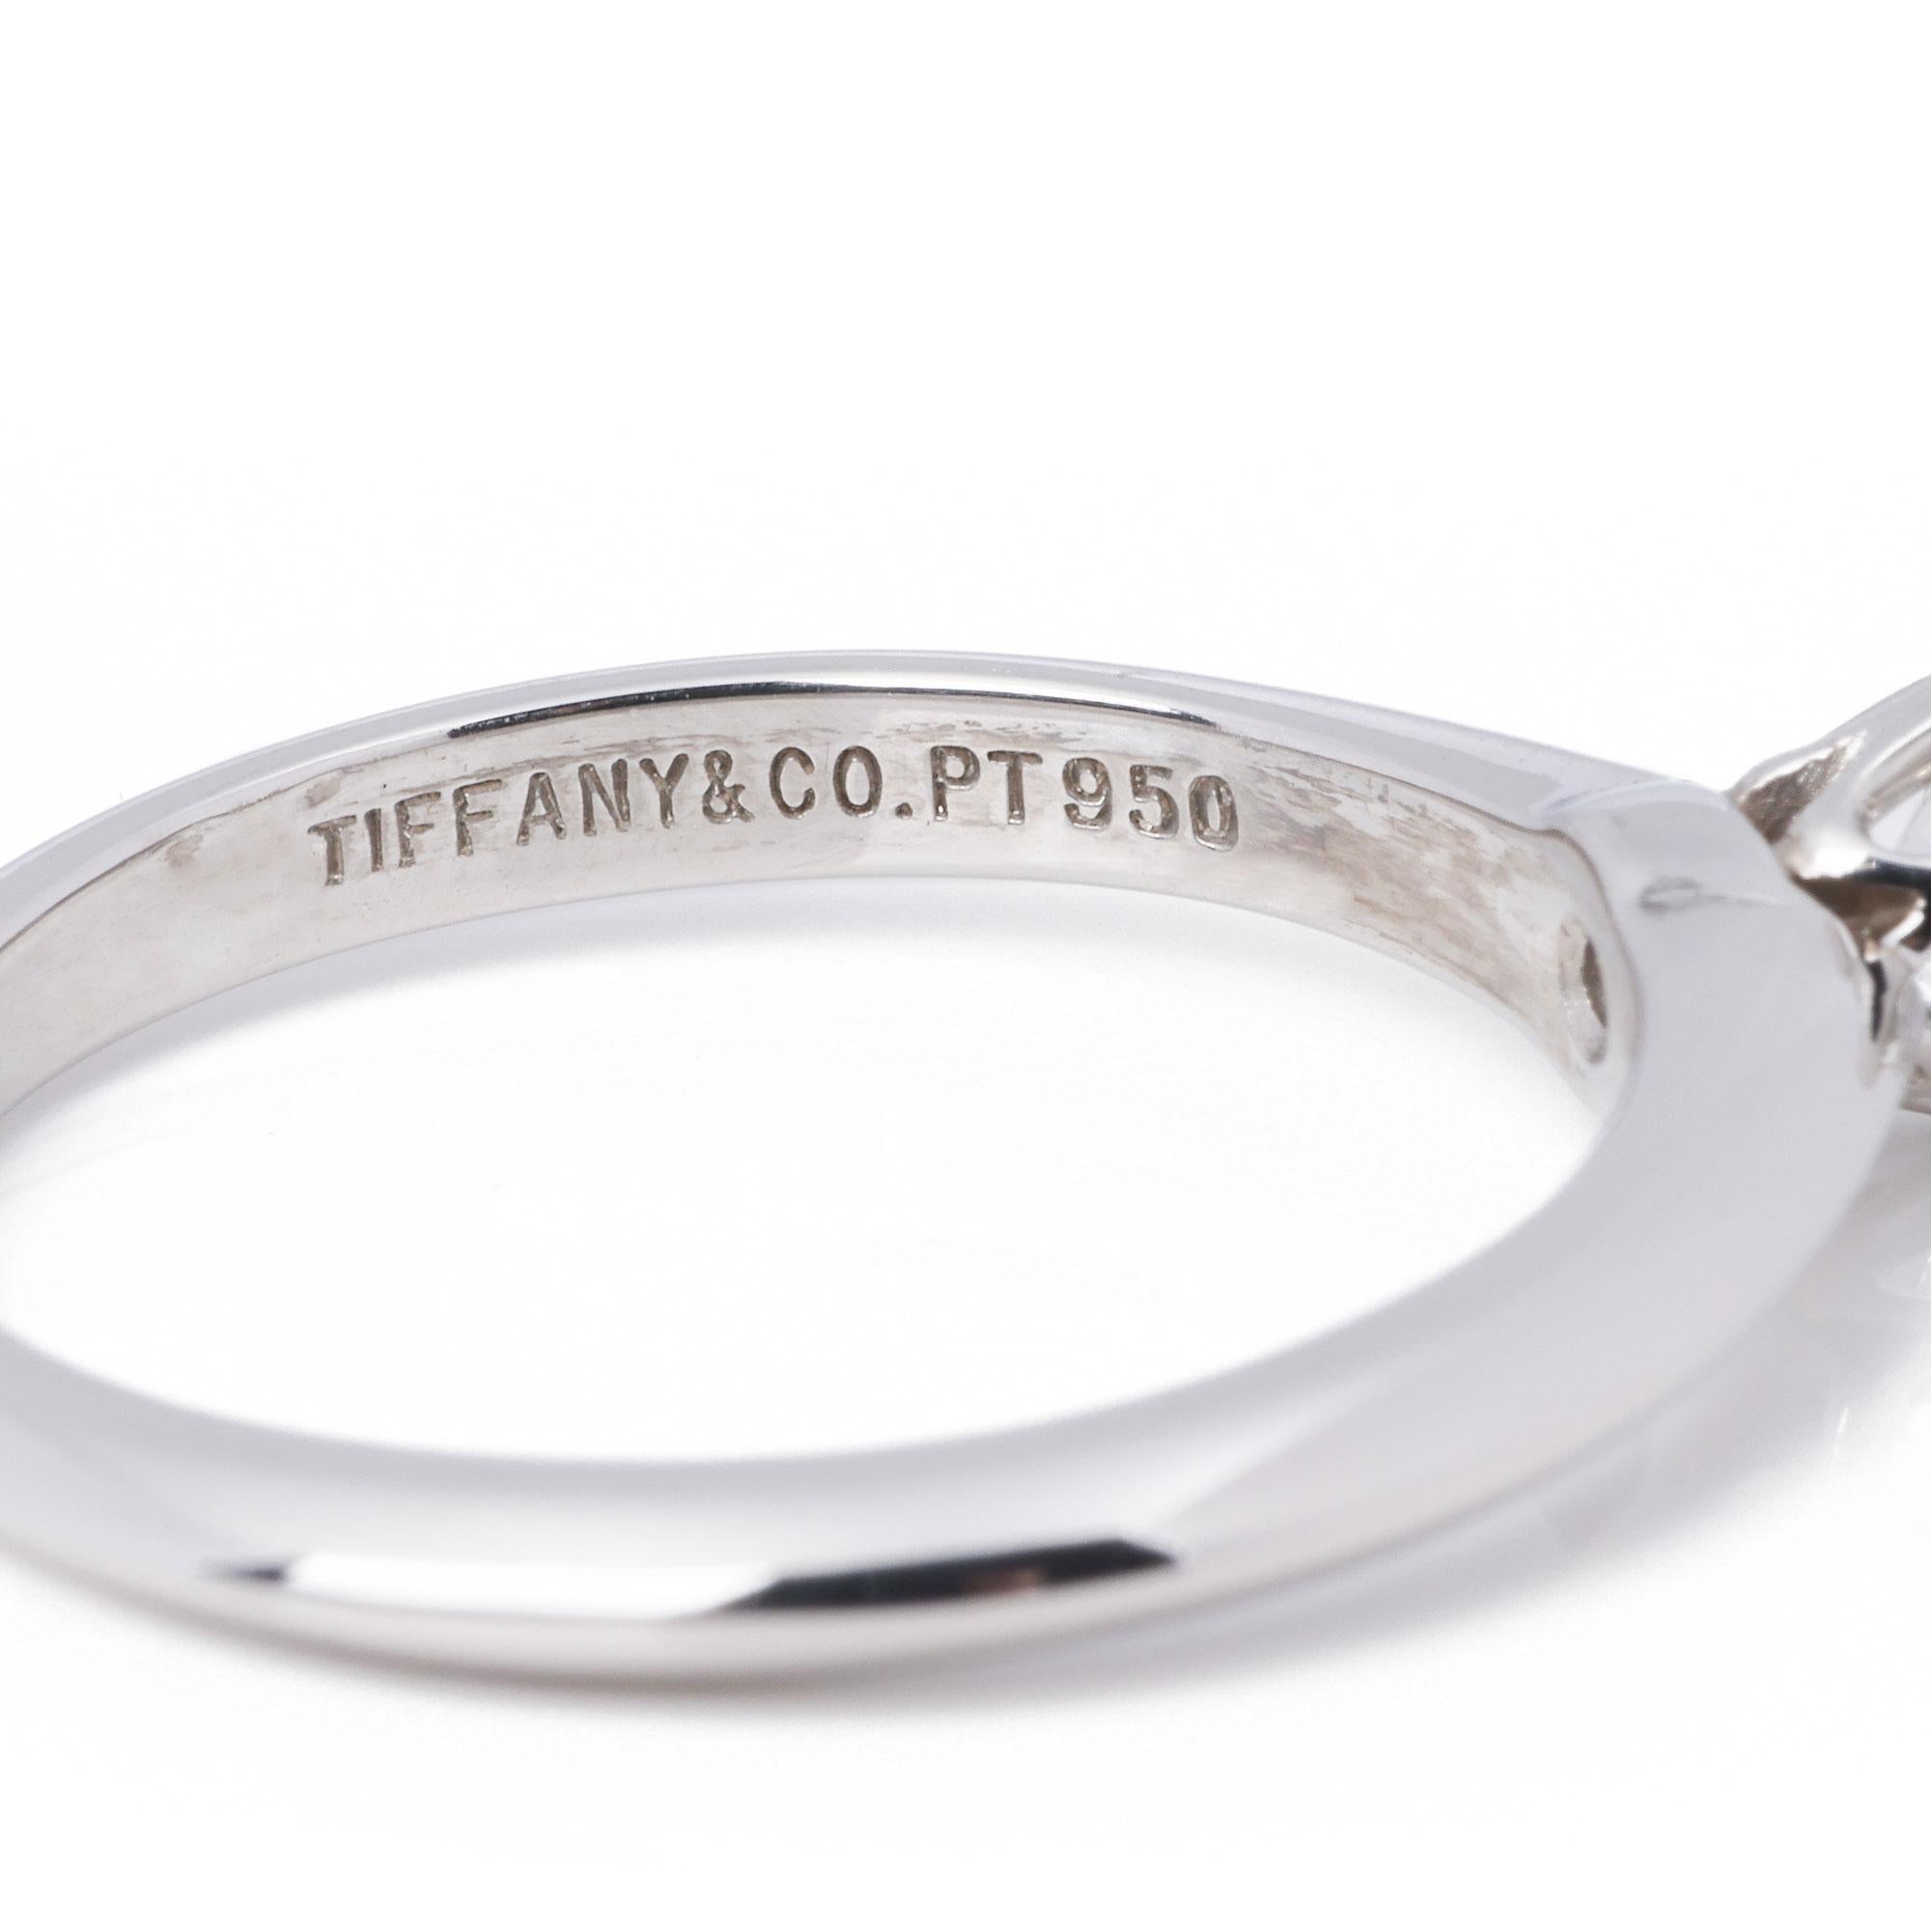 This ring by Tiffany & Co is from their engagement collections and features a solitaire brilliant cut 0.22ct G VVS2 diamond in a classic Tiffany 6 prong setting in platinum. UK ring size I. EU ring size 48. US ring size 4 1/4. Comes complete with